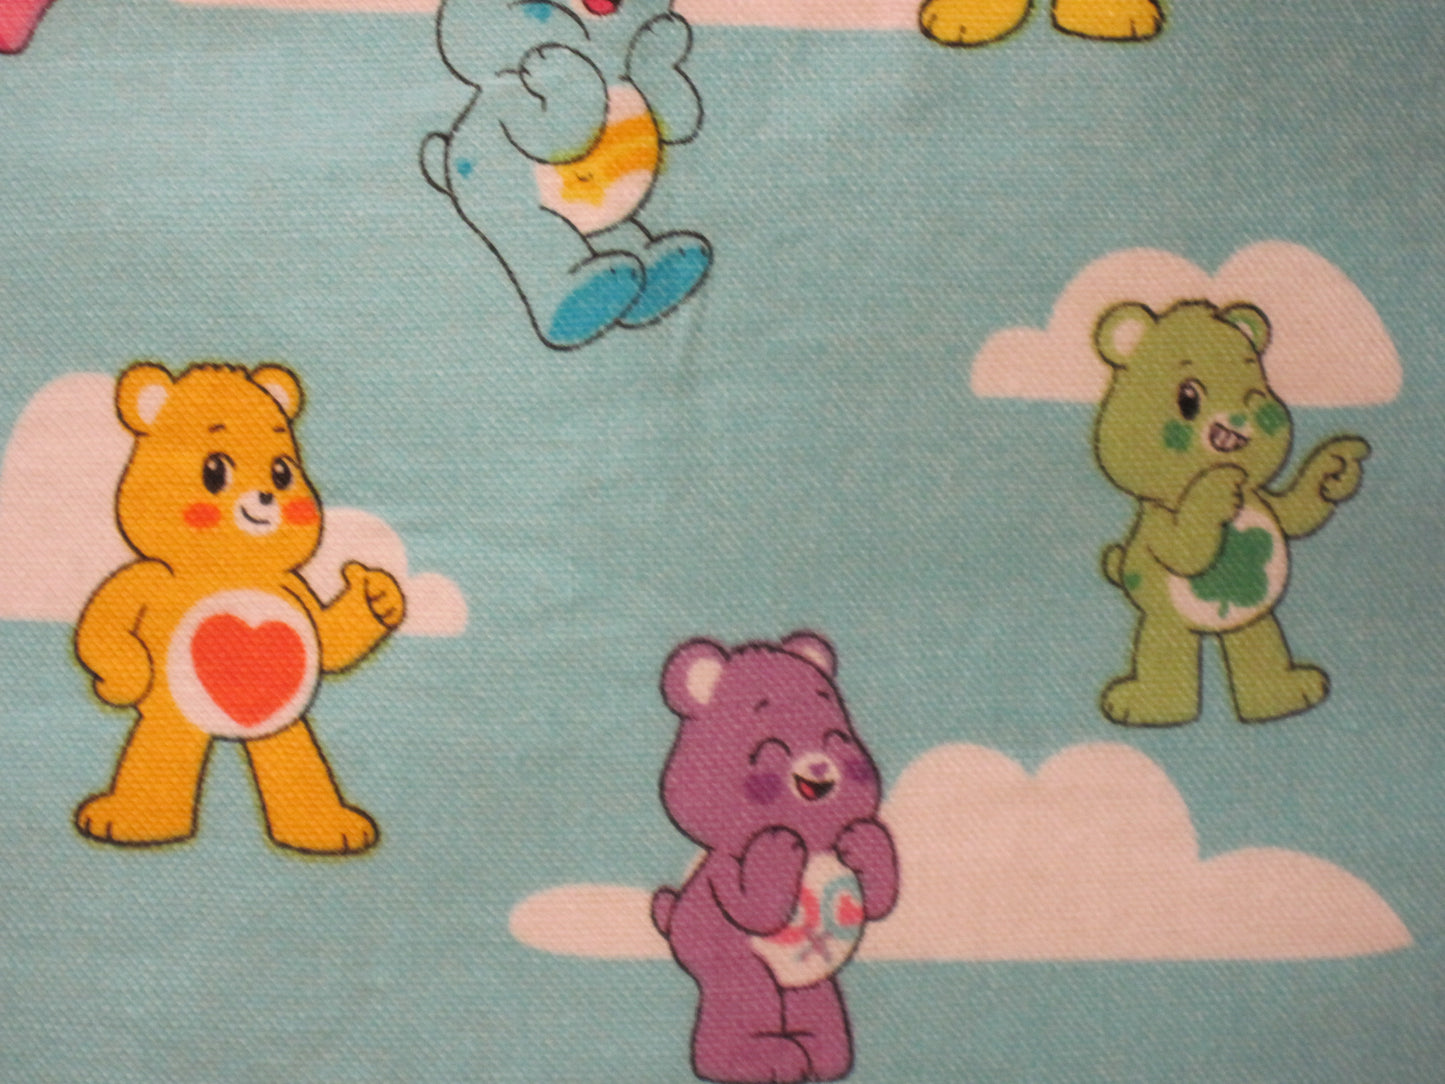 Small Care Bear with Yellow Project bag with snaps